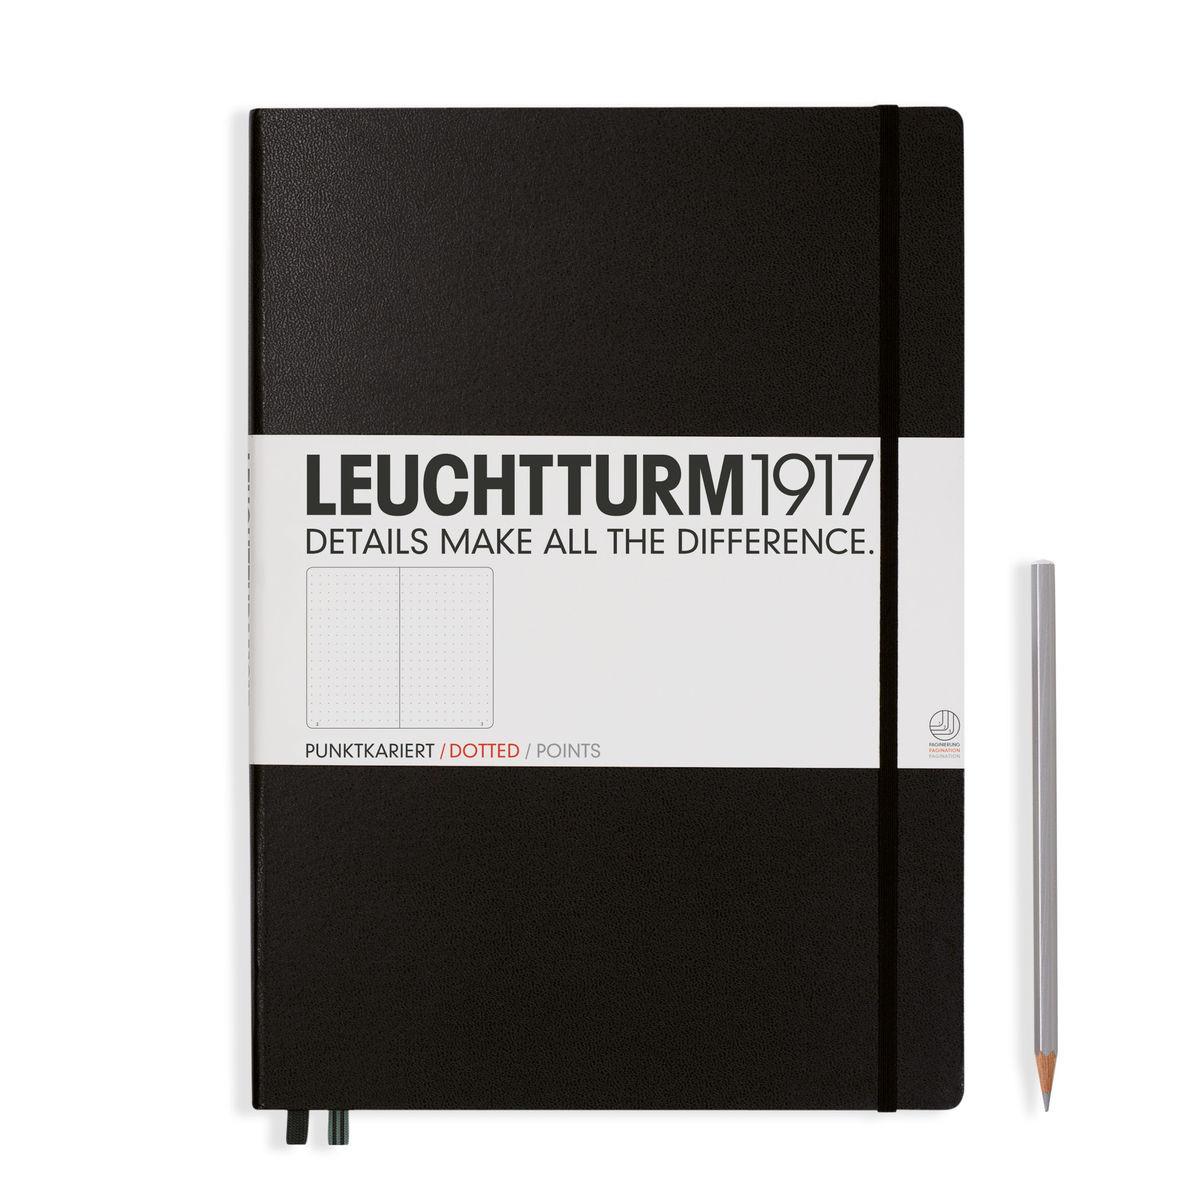 Selected image for Leuchtturm1917 Notes, Master A4+, Tačke, Tvrd povez, Crni